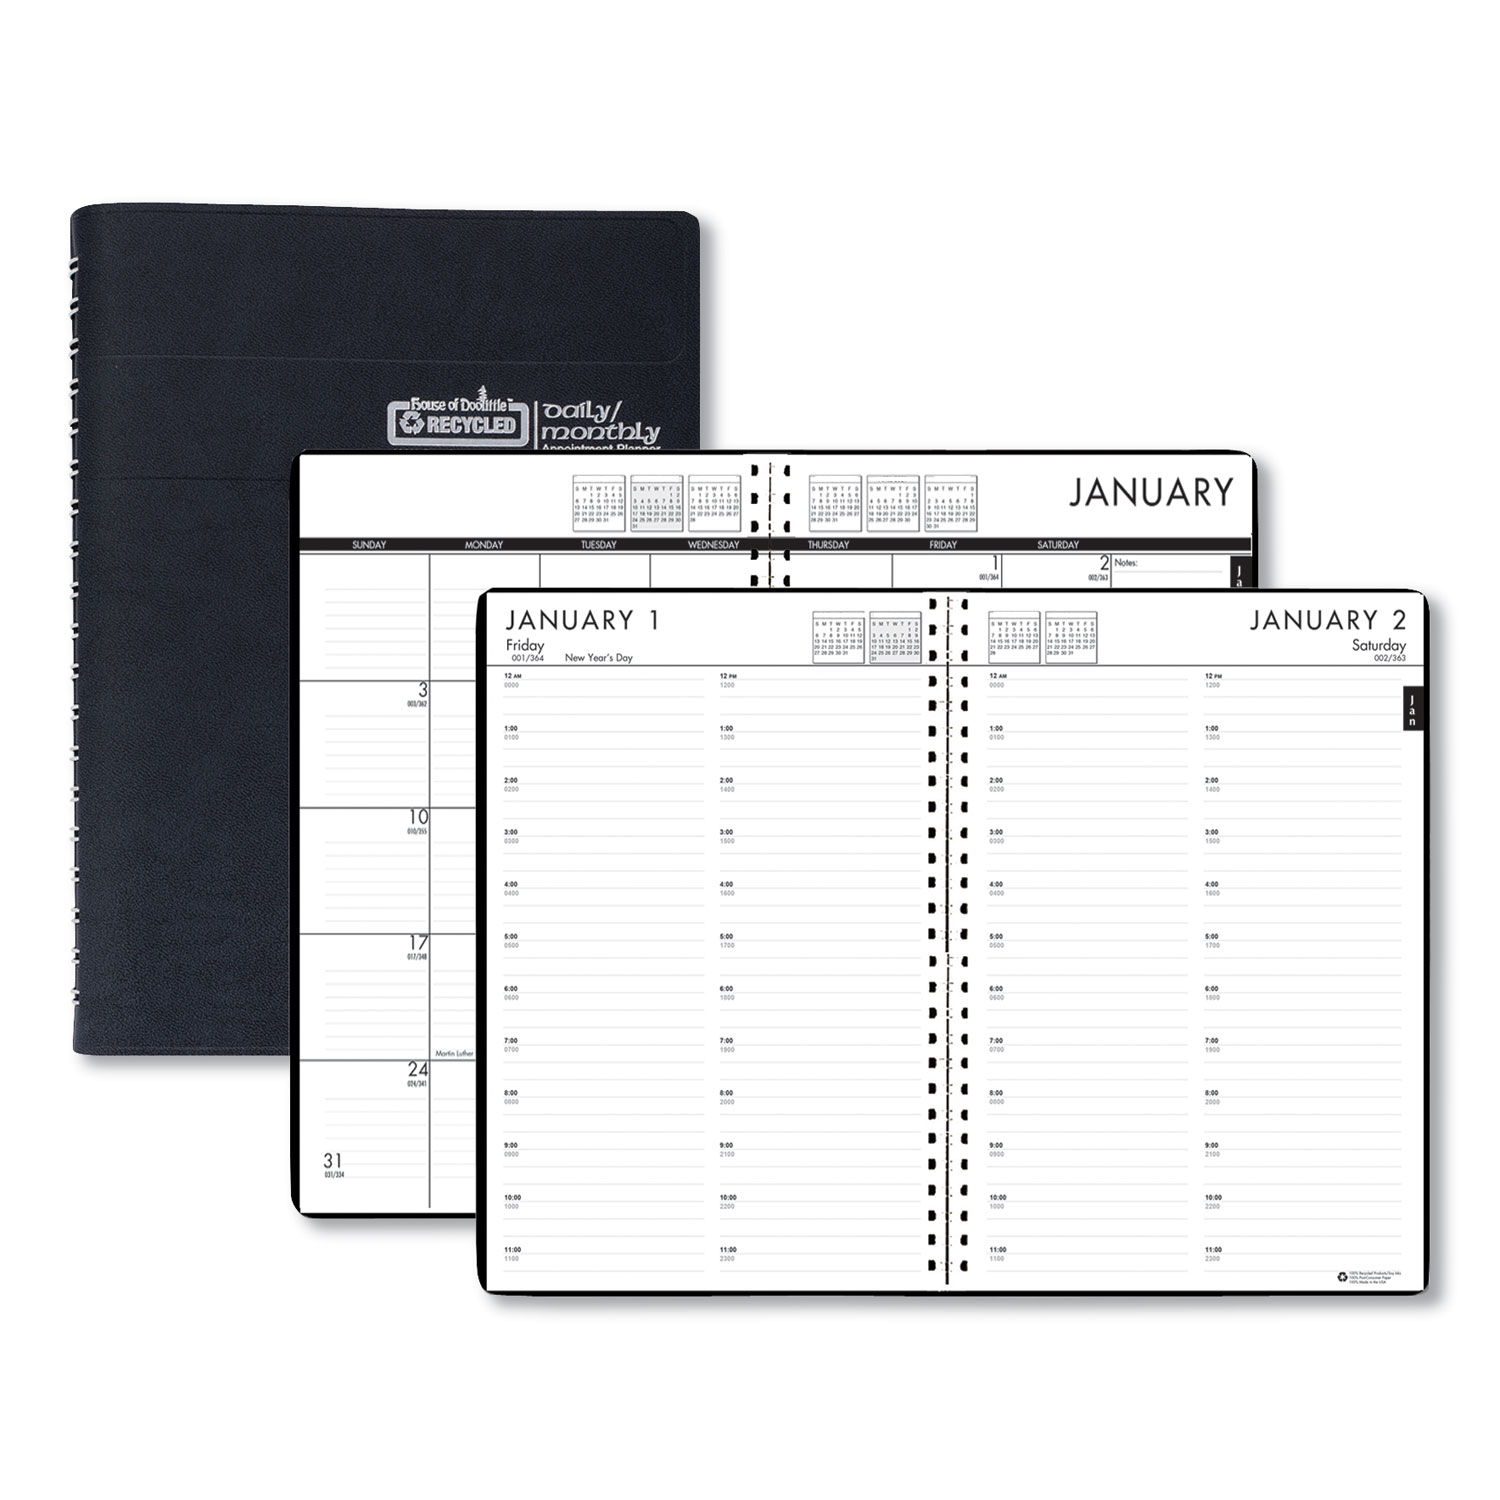  House of Doolittle 2896-32 Recycled 24/7 Daily Appointment Book/Monthly Planner, 10 x 7, Black, 2020 (HOD289632) 